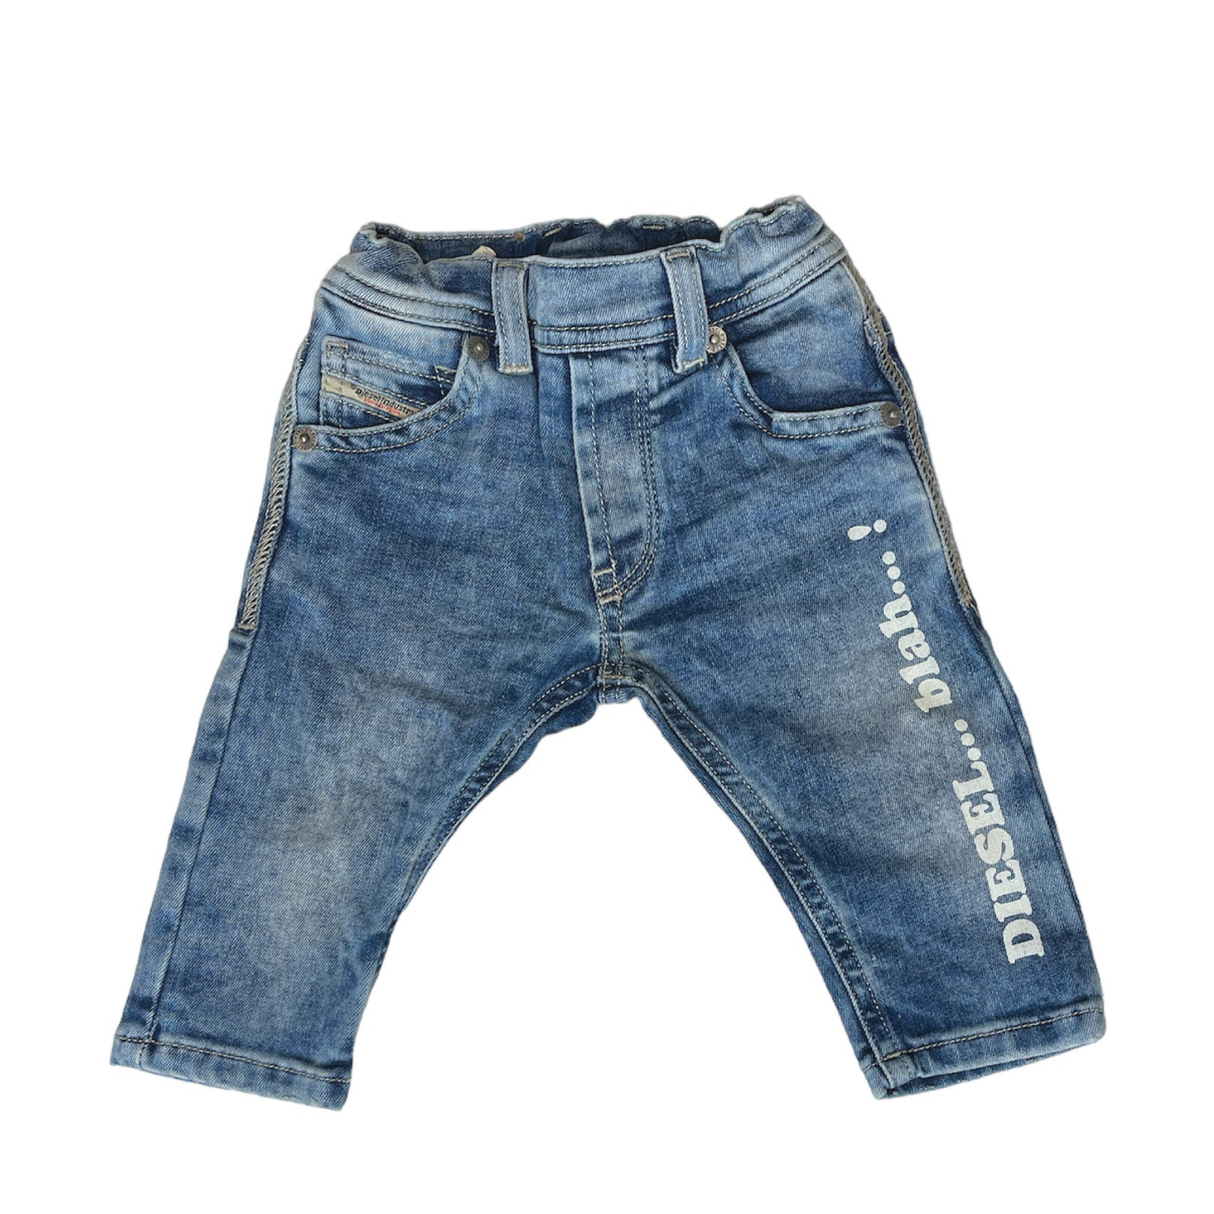 A Second chance - Diesel pant denim 6 Months Kids - Delivery all Over Lebanon